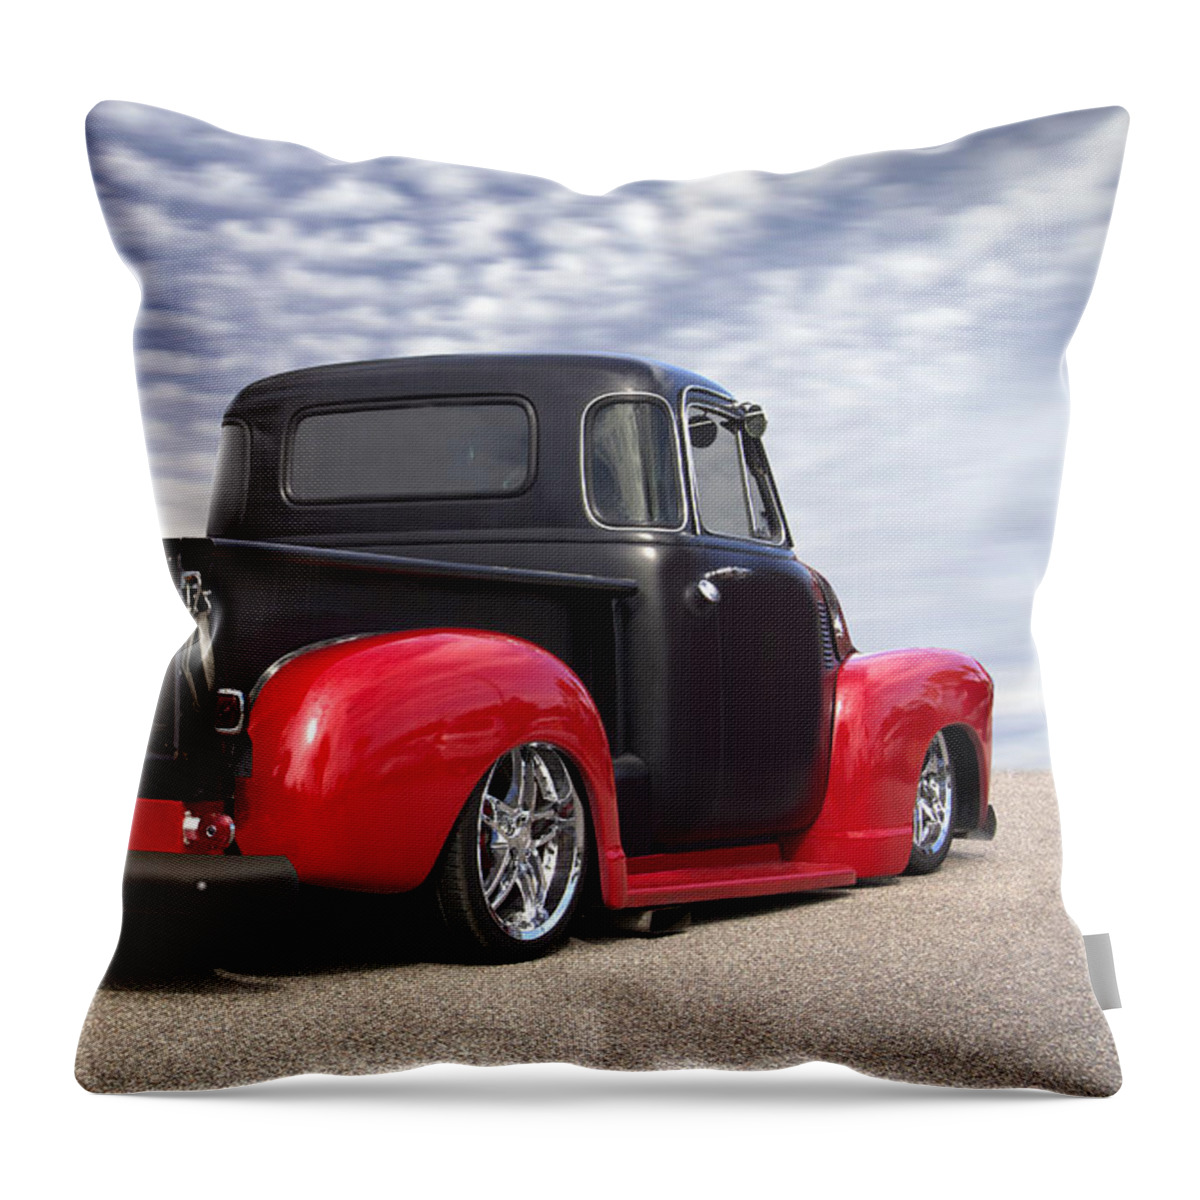 Transportation Throw Pillow featuring the photograph 1954 Chevy Truck Lowrider by Mike McGlothlen